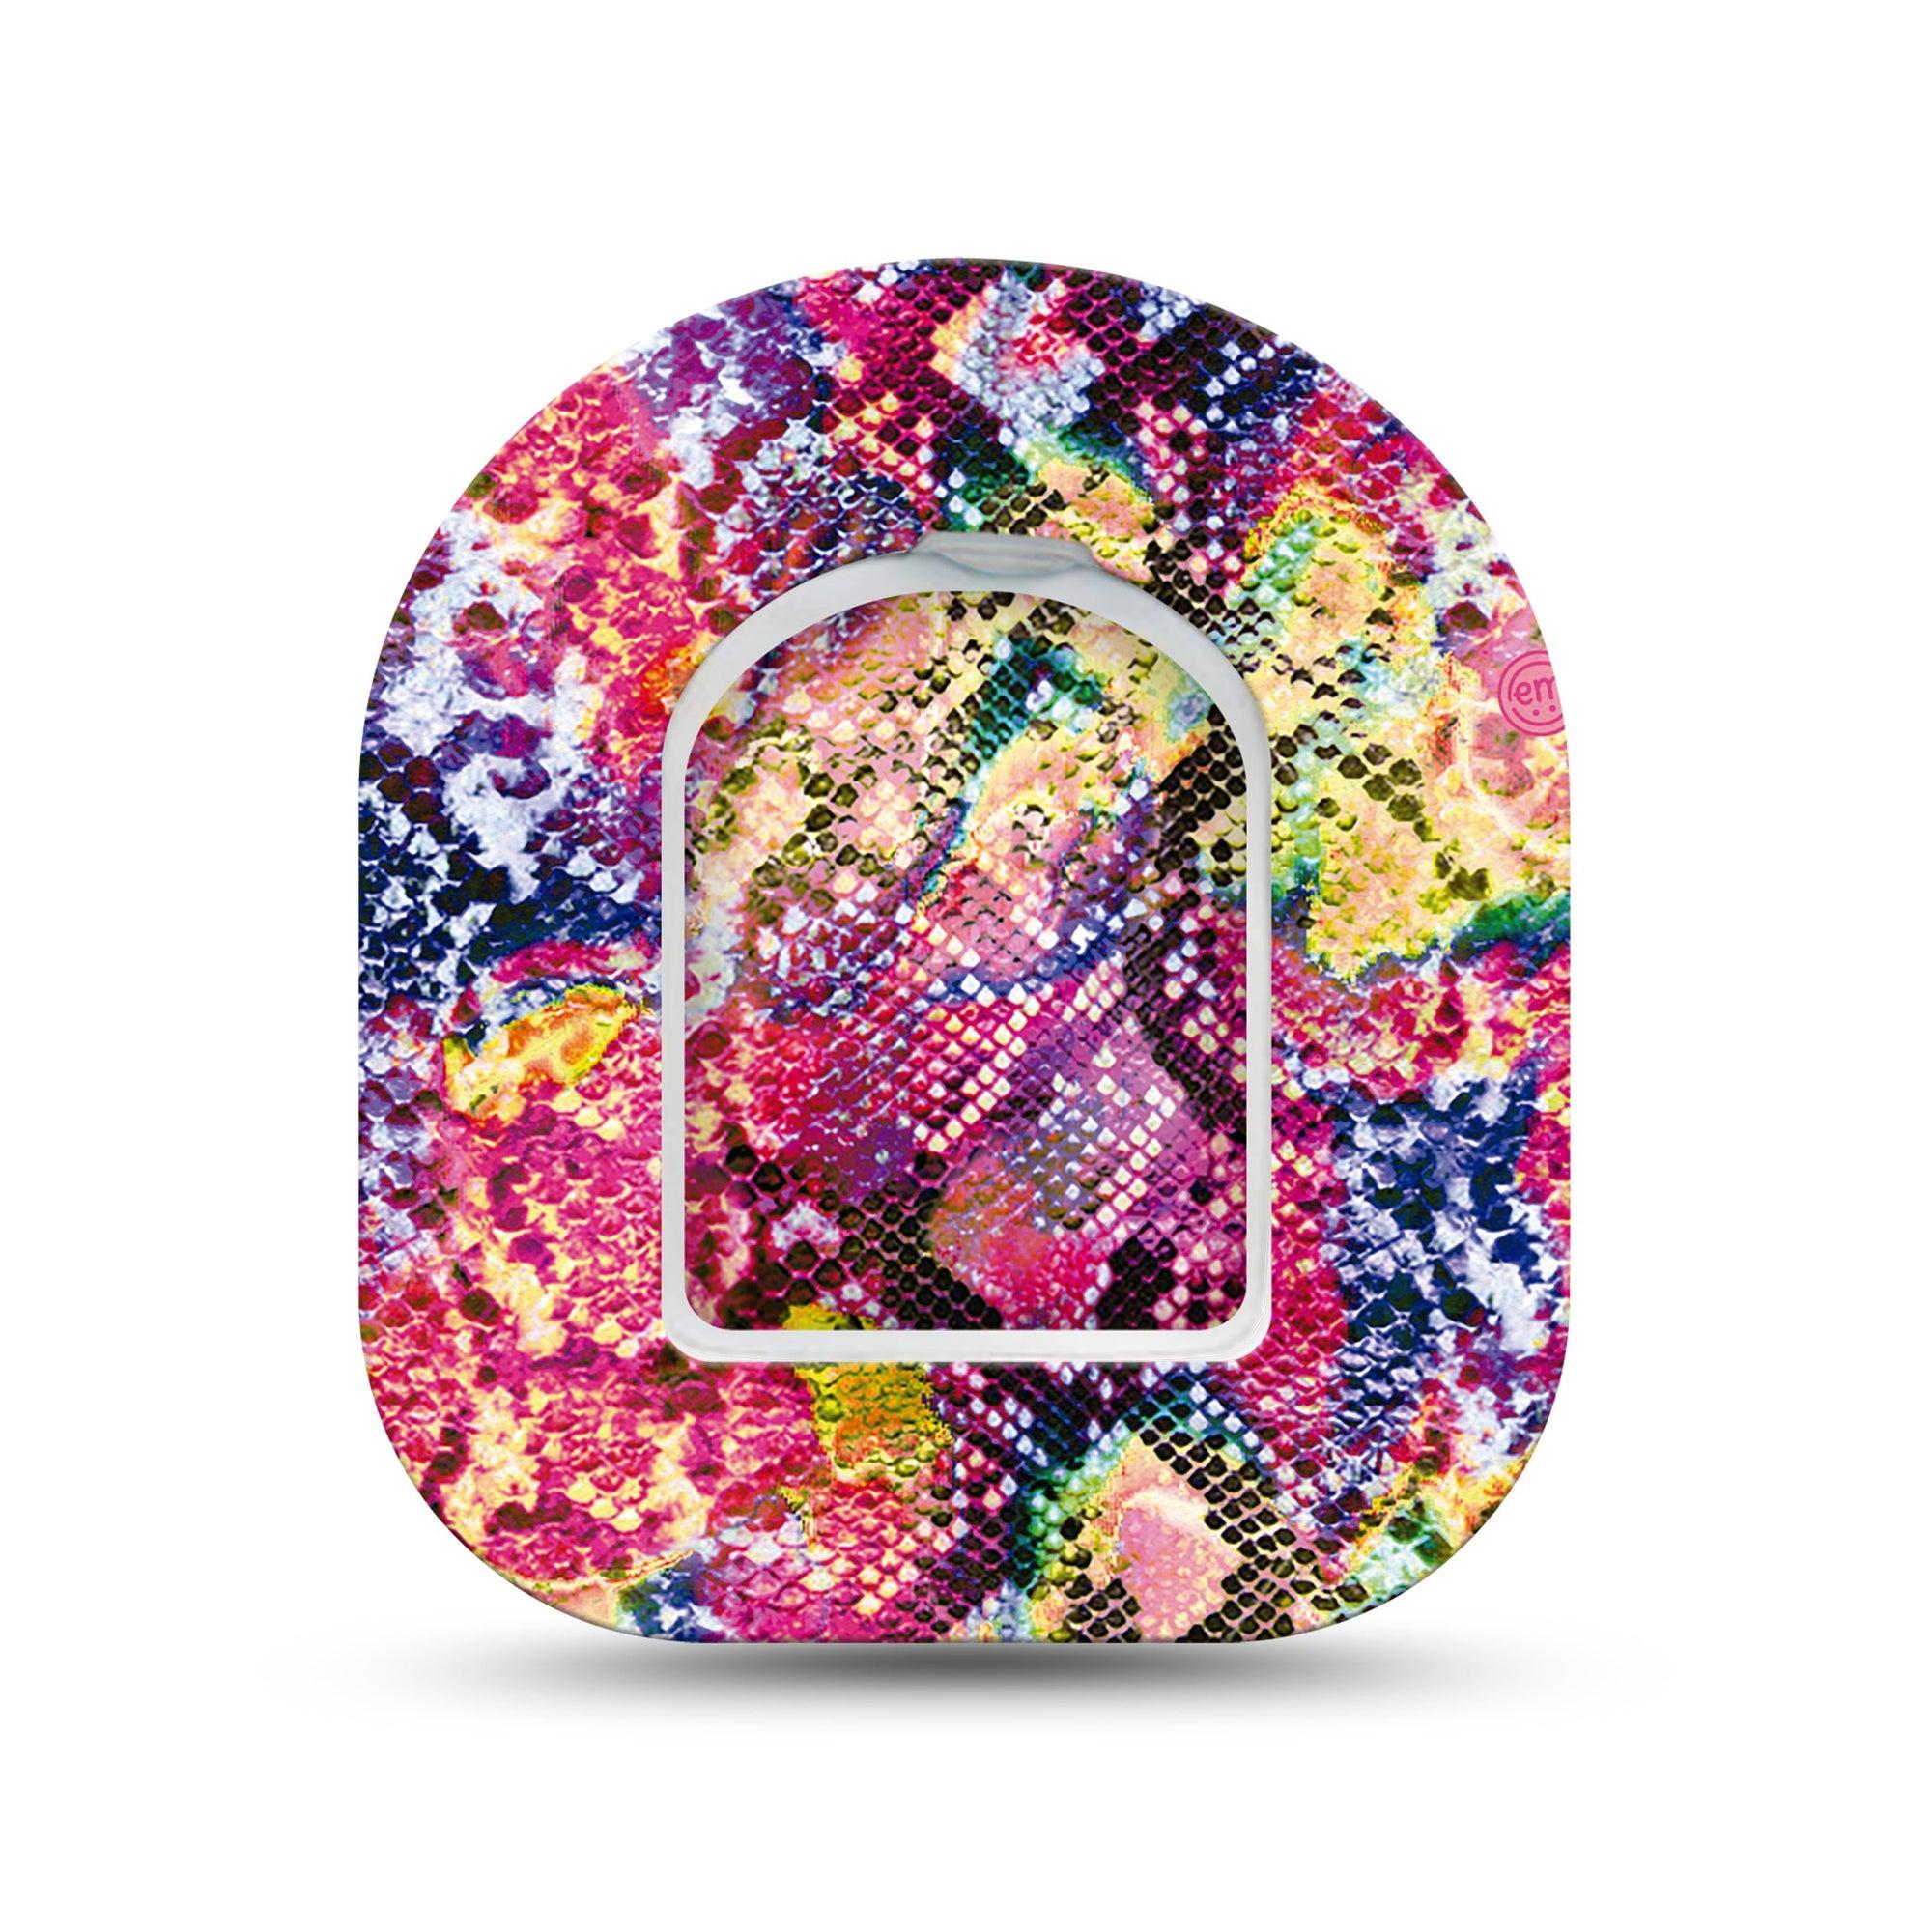 ExpressionMed Rainbow Snakeskin Omnipod Surface Center Sticker and Mini Tape Animal Skin Inspired Vinyl Sticker and Tape Design Pump Design